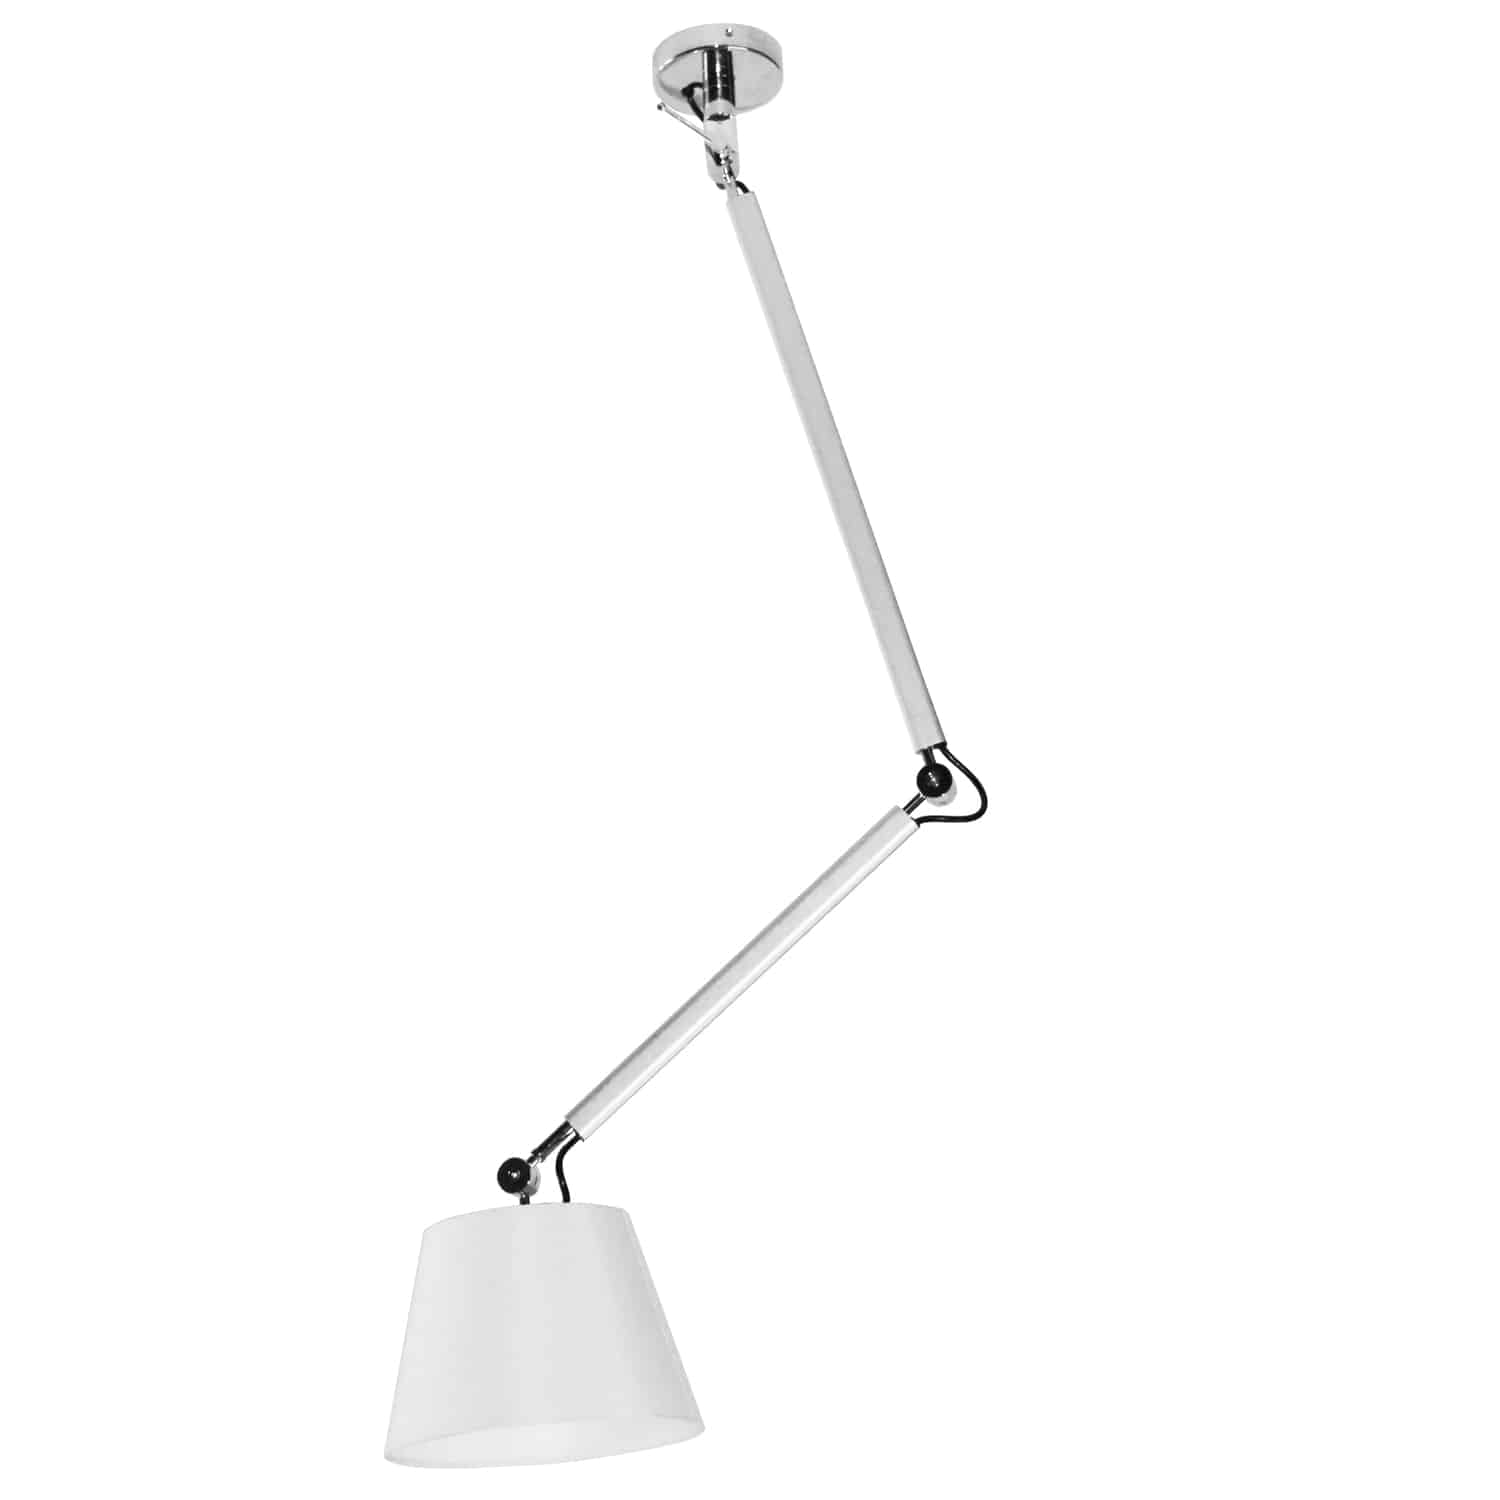 1 Light Adjustable Arm Fixture, Silver Finish with White Shade 